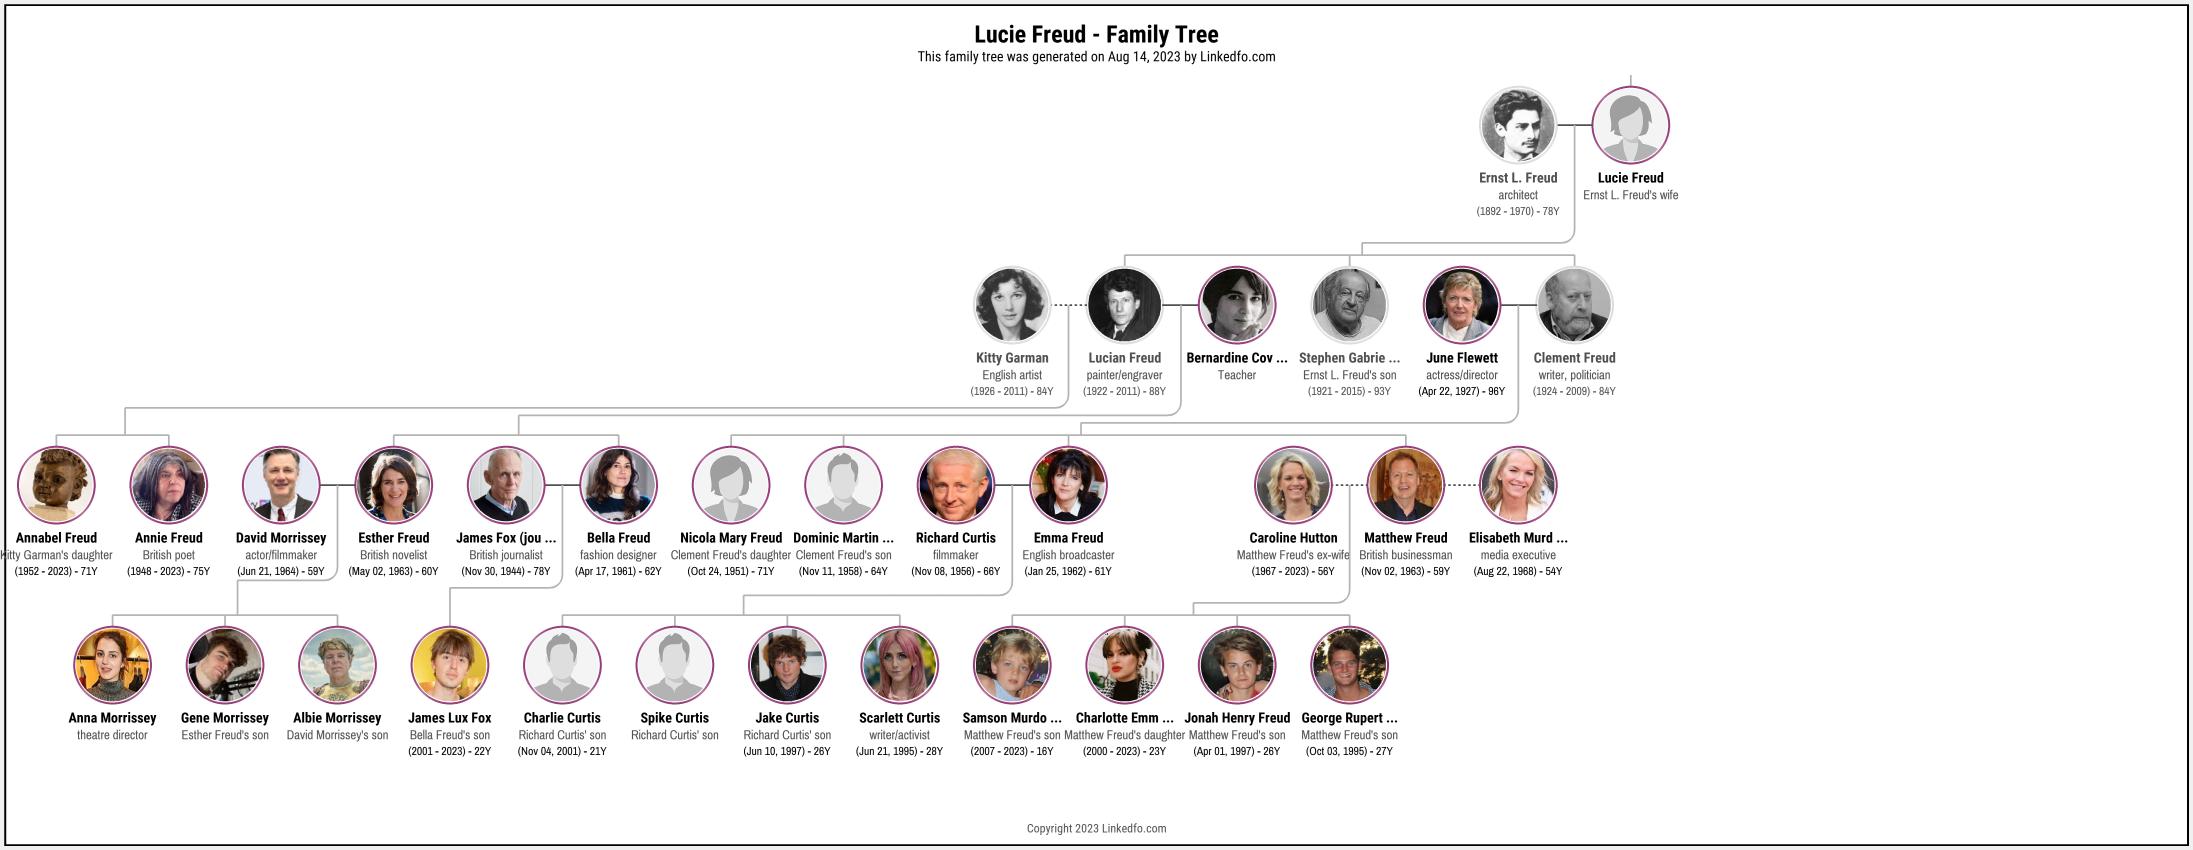 Lucie Freud's Family Tree